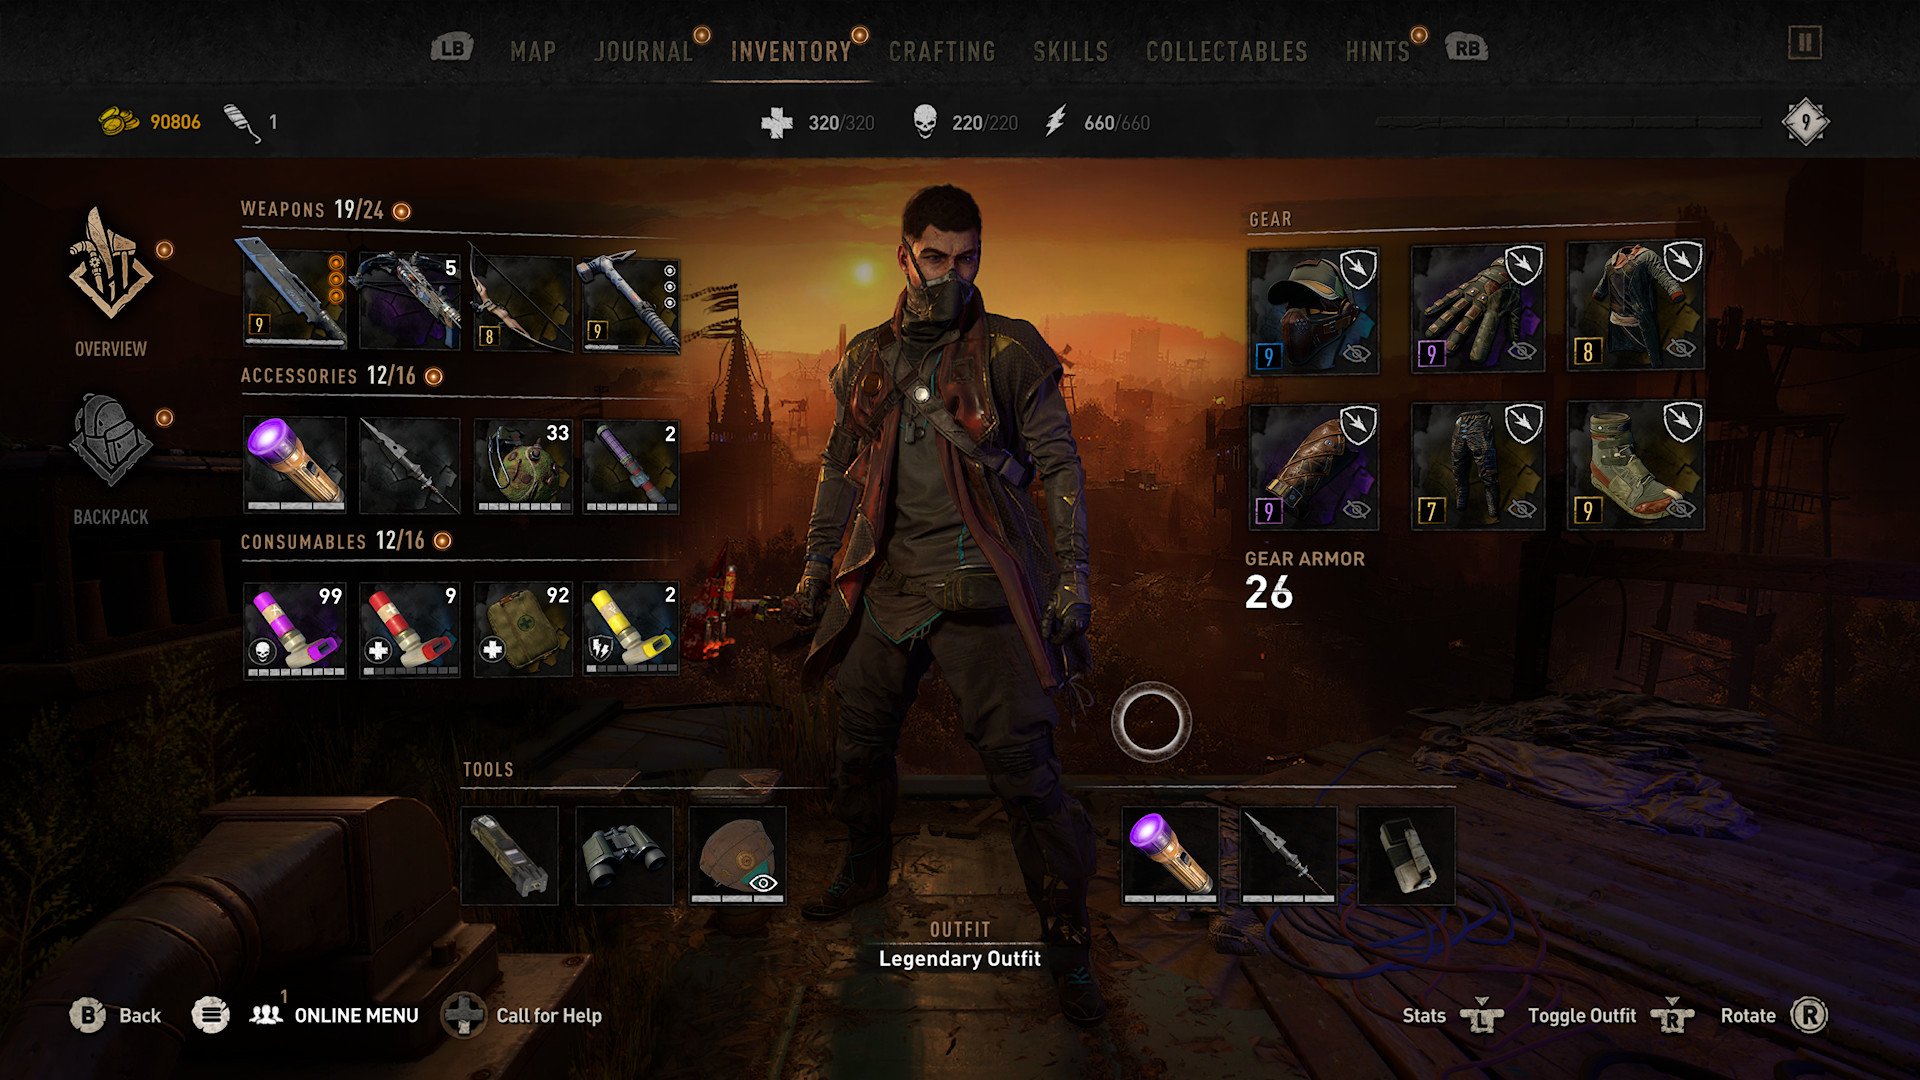 How to get the best Level 9 weapons and gear in Dying Light 2 | Windows